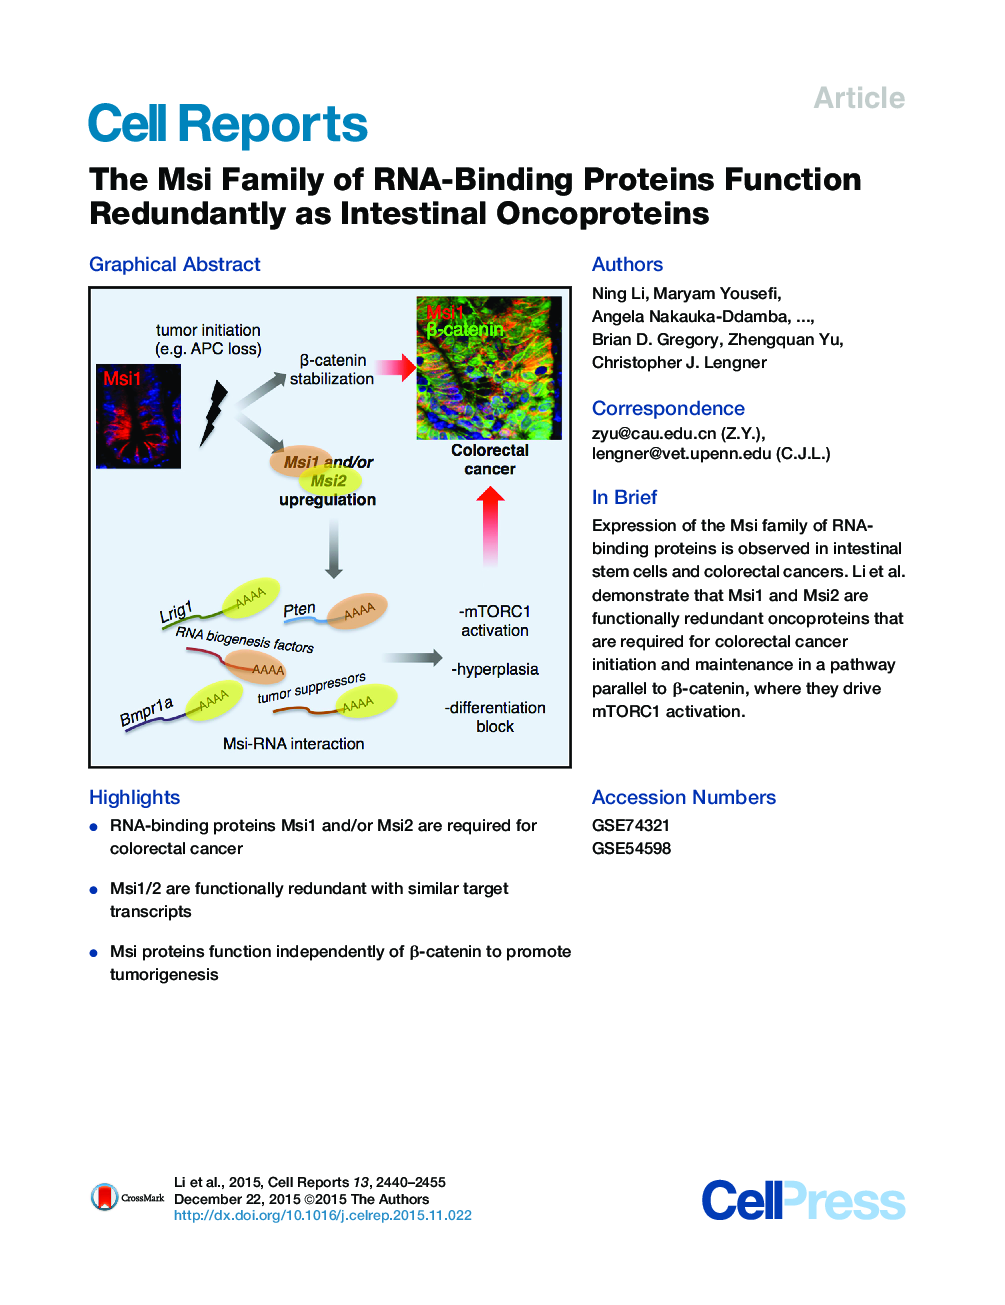 The Msi Family of RNA-Binding Proteins Function Redundantly as Intestinal Oncoproteins 